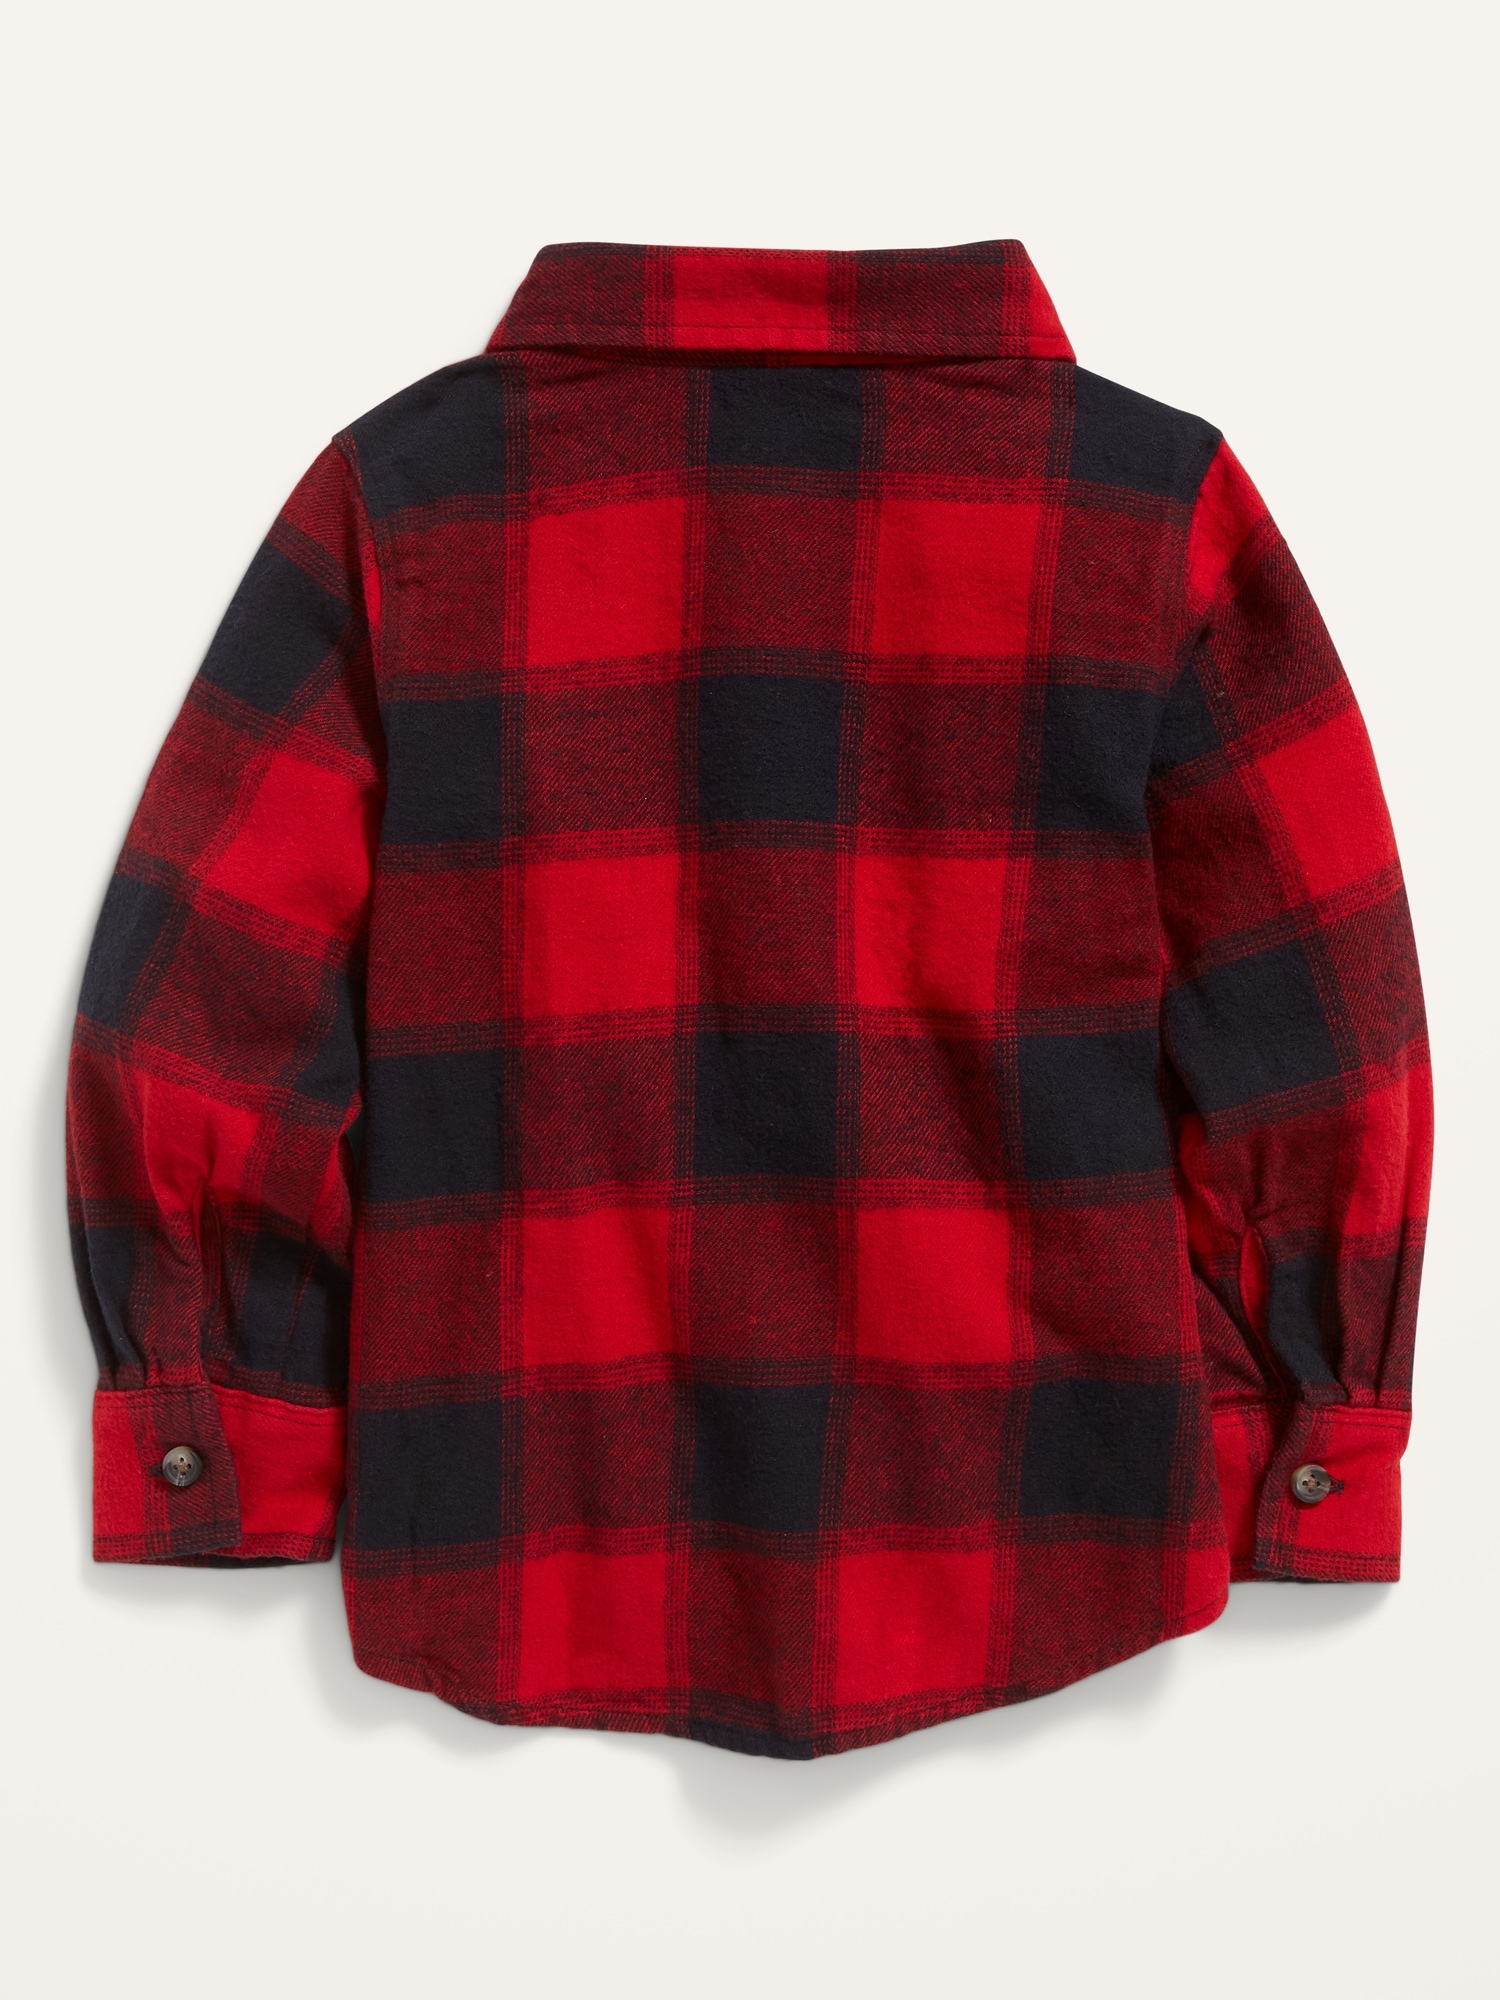 Plaid Flannel Long Sleeve Shirt For Toddler Boys Old Navy